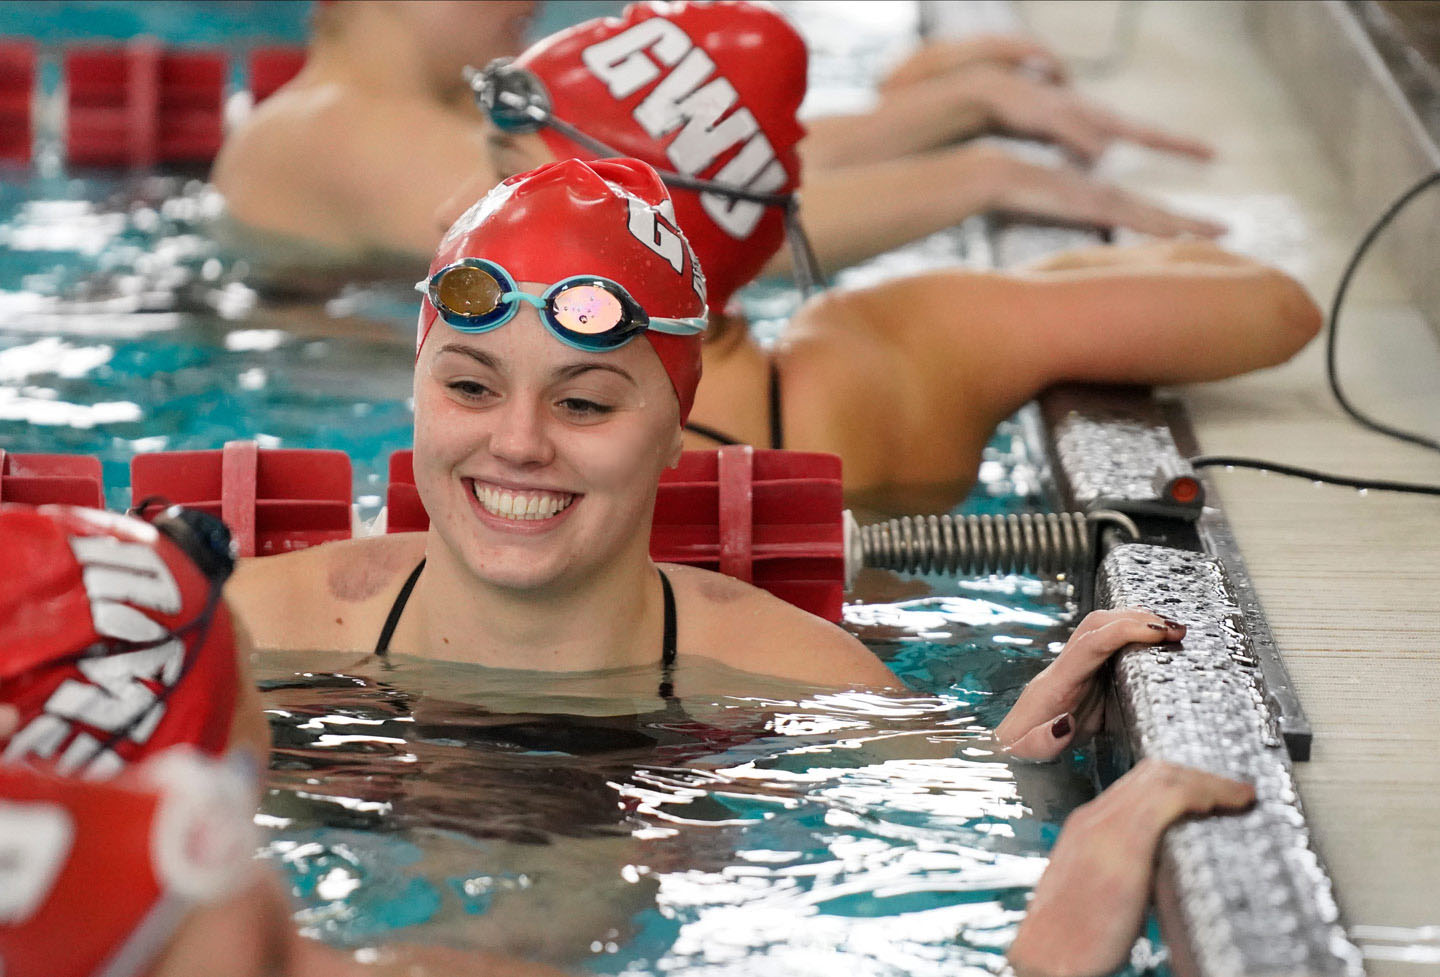 GWU Female Swimmer at competition